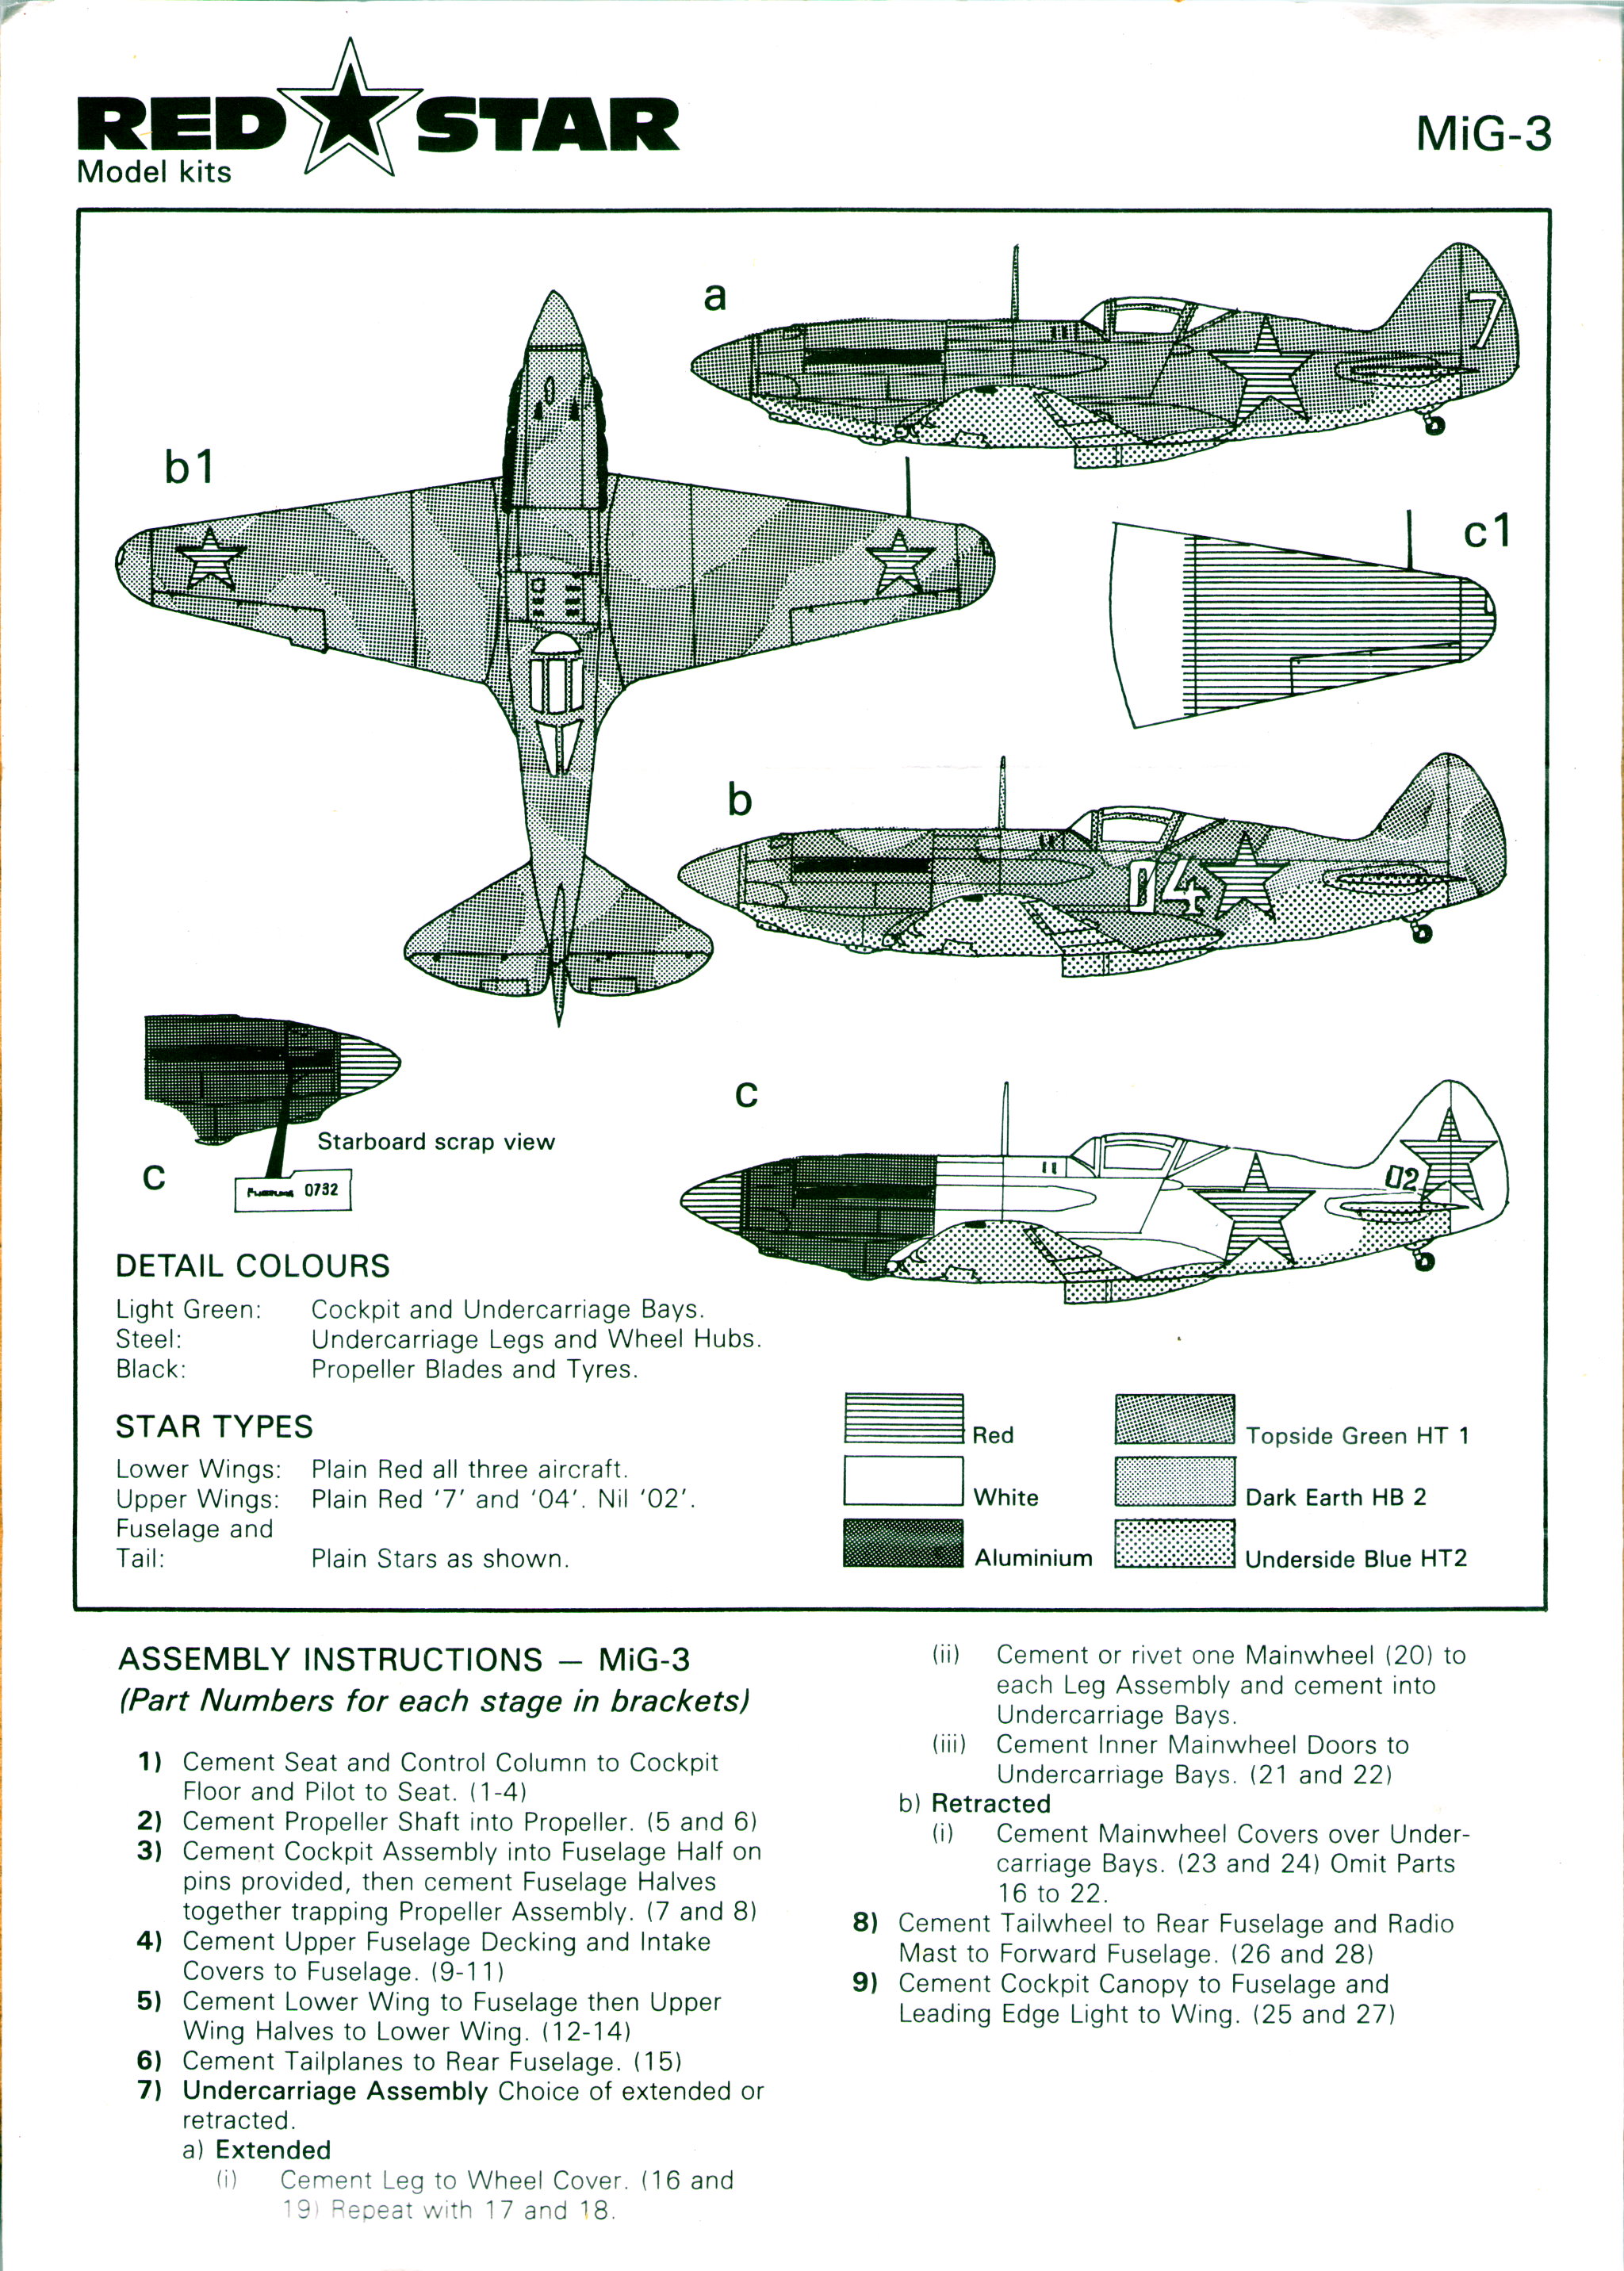 Red Star RS1/4 Lavochkin LaGG-3, Red Star Model Kits Ltd, 1983/4 assembly instructions for F311 Yak-3